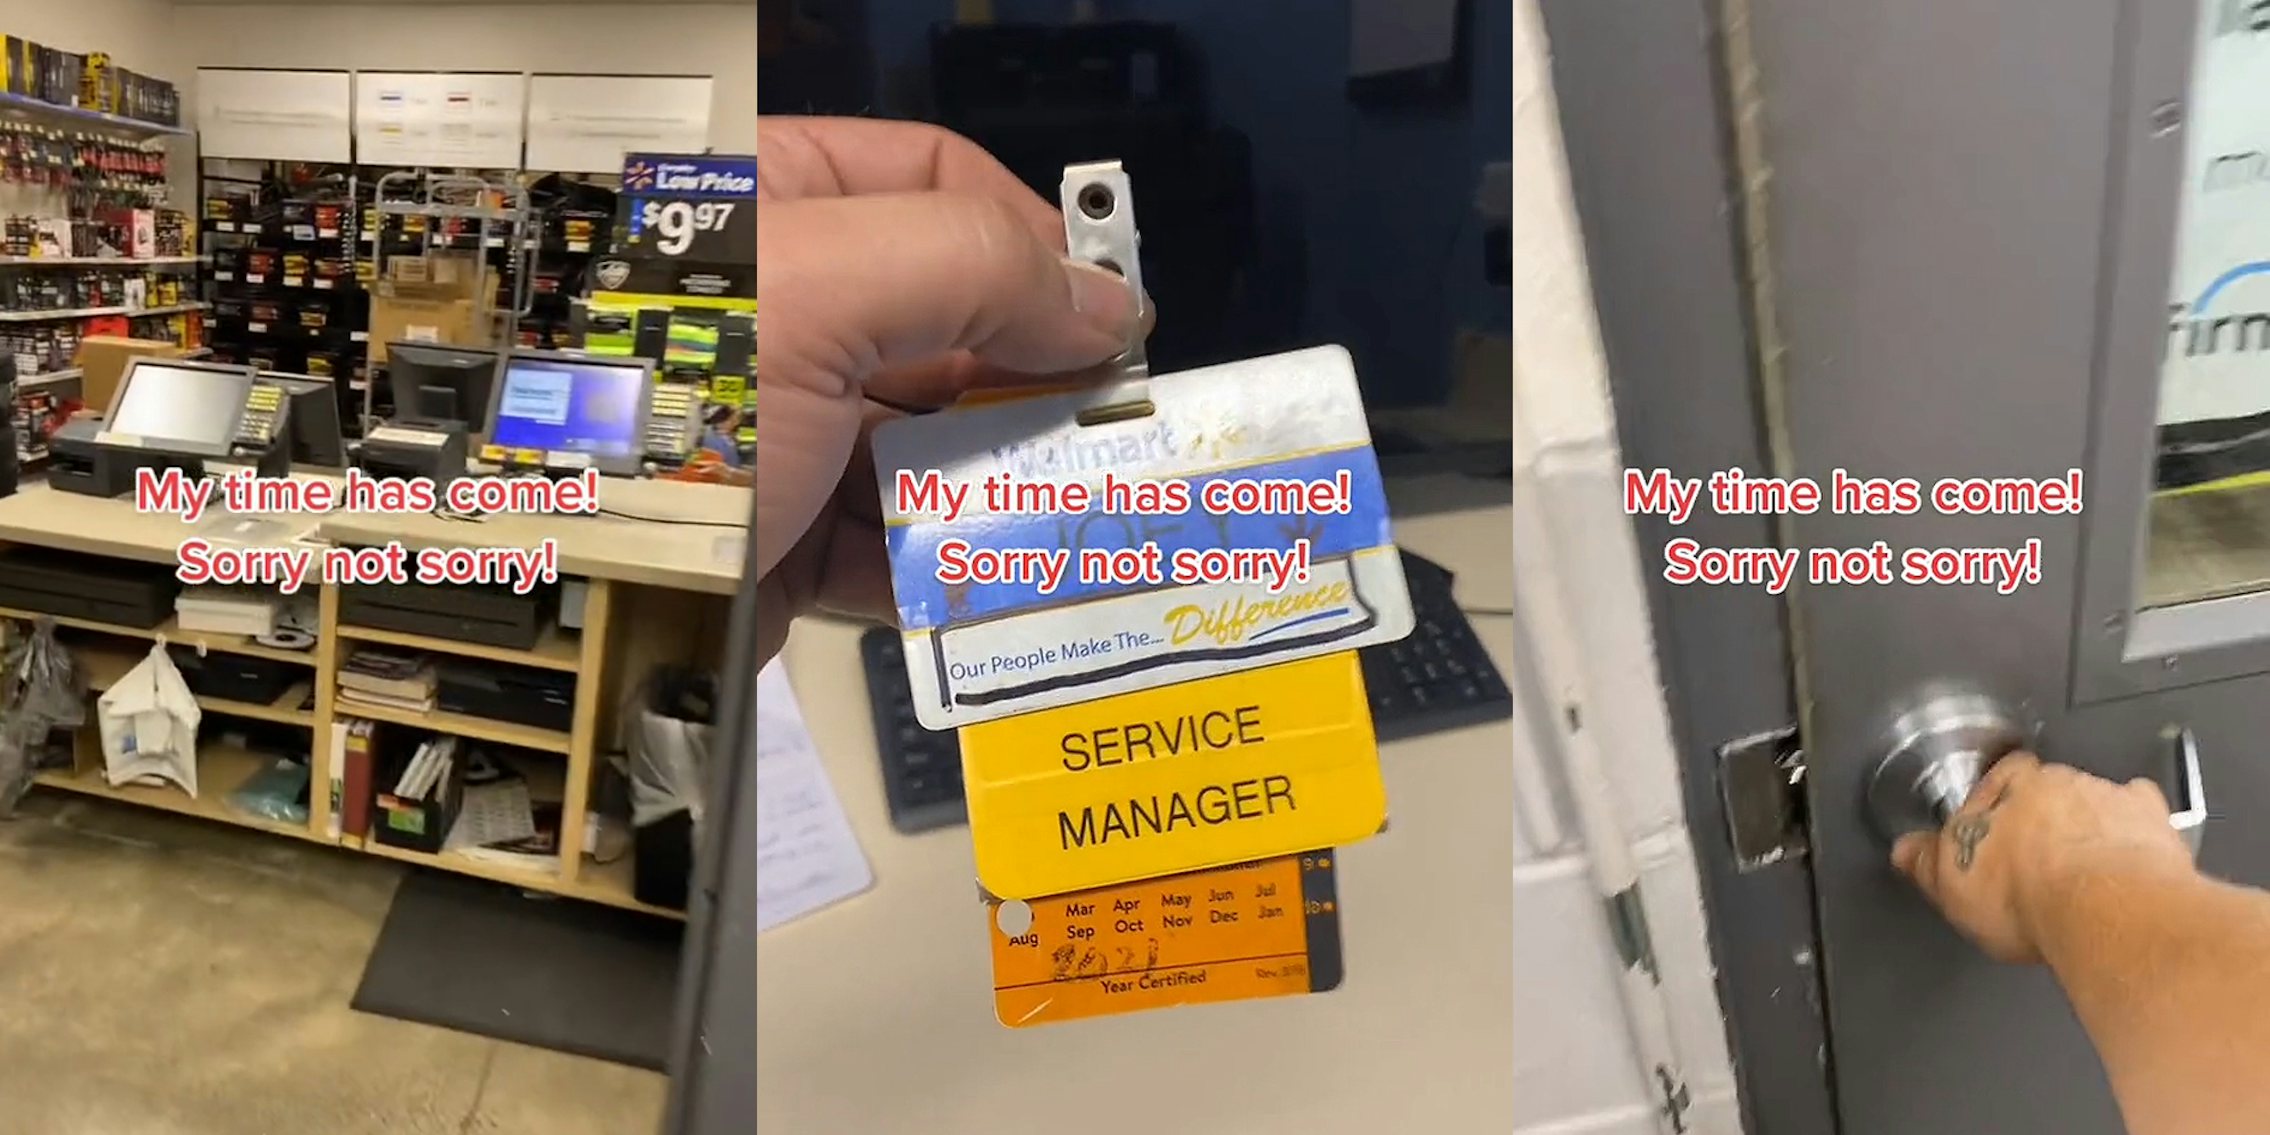 Walmart behind counter caption 'My time has come! Sorry not sorry!' (l) man holding his Walmart service manager tag caption 'My time has come! Sorry not sorry!' (c) man holding handle of door caption 'My time has come! Sorry not sorry!' (r)